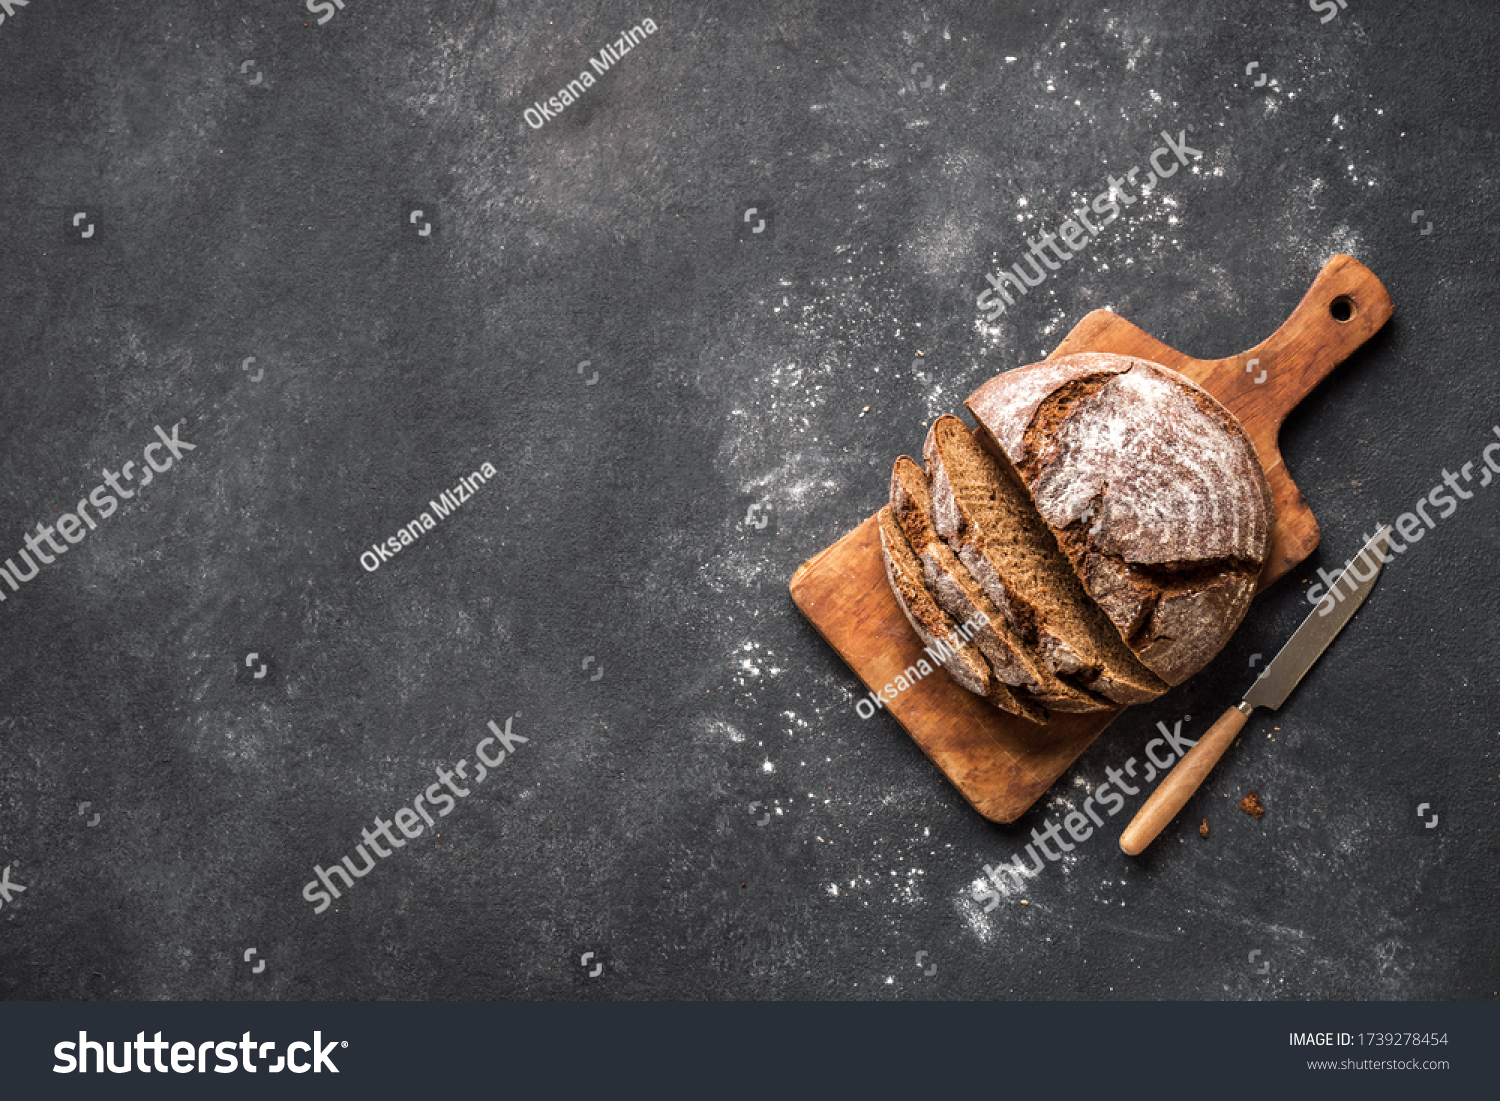 Fresh Sourdough Bread  on black background. Fresh baked homemade sliced rye bread, top view, copy space. #1739278454